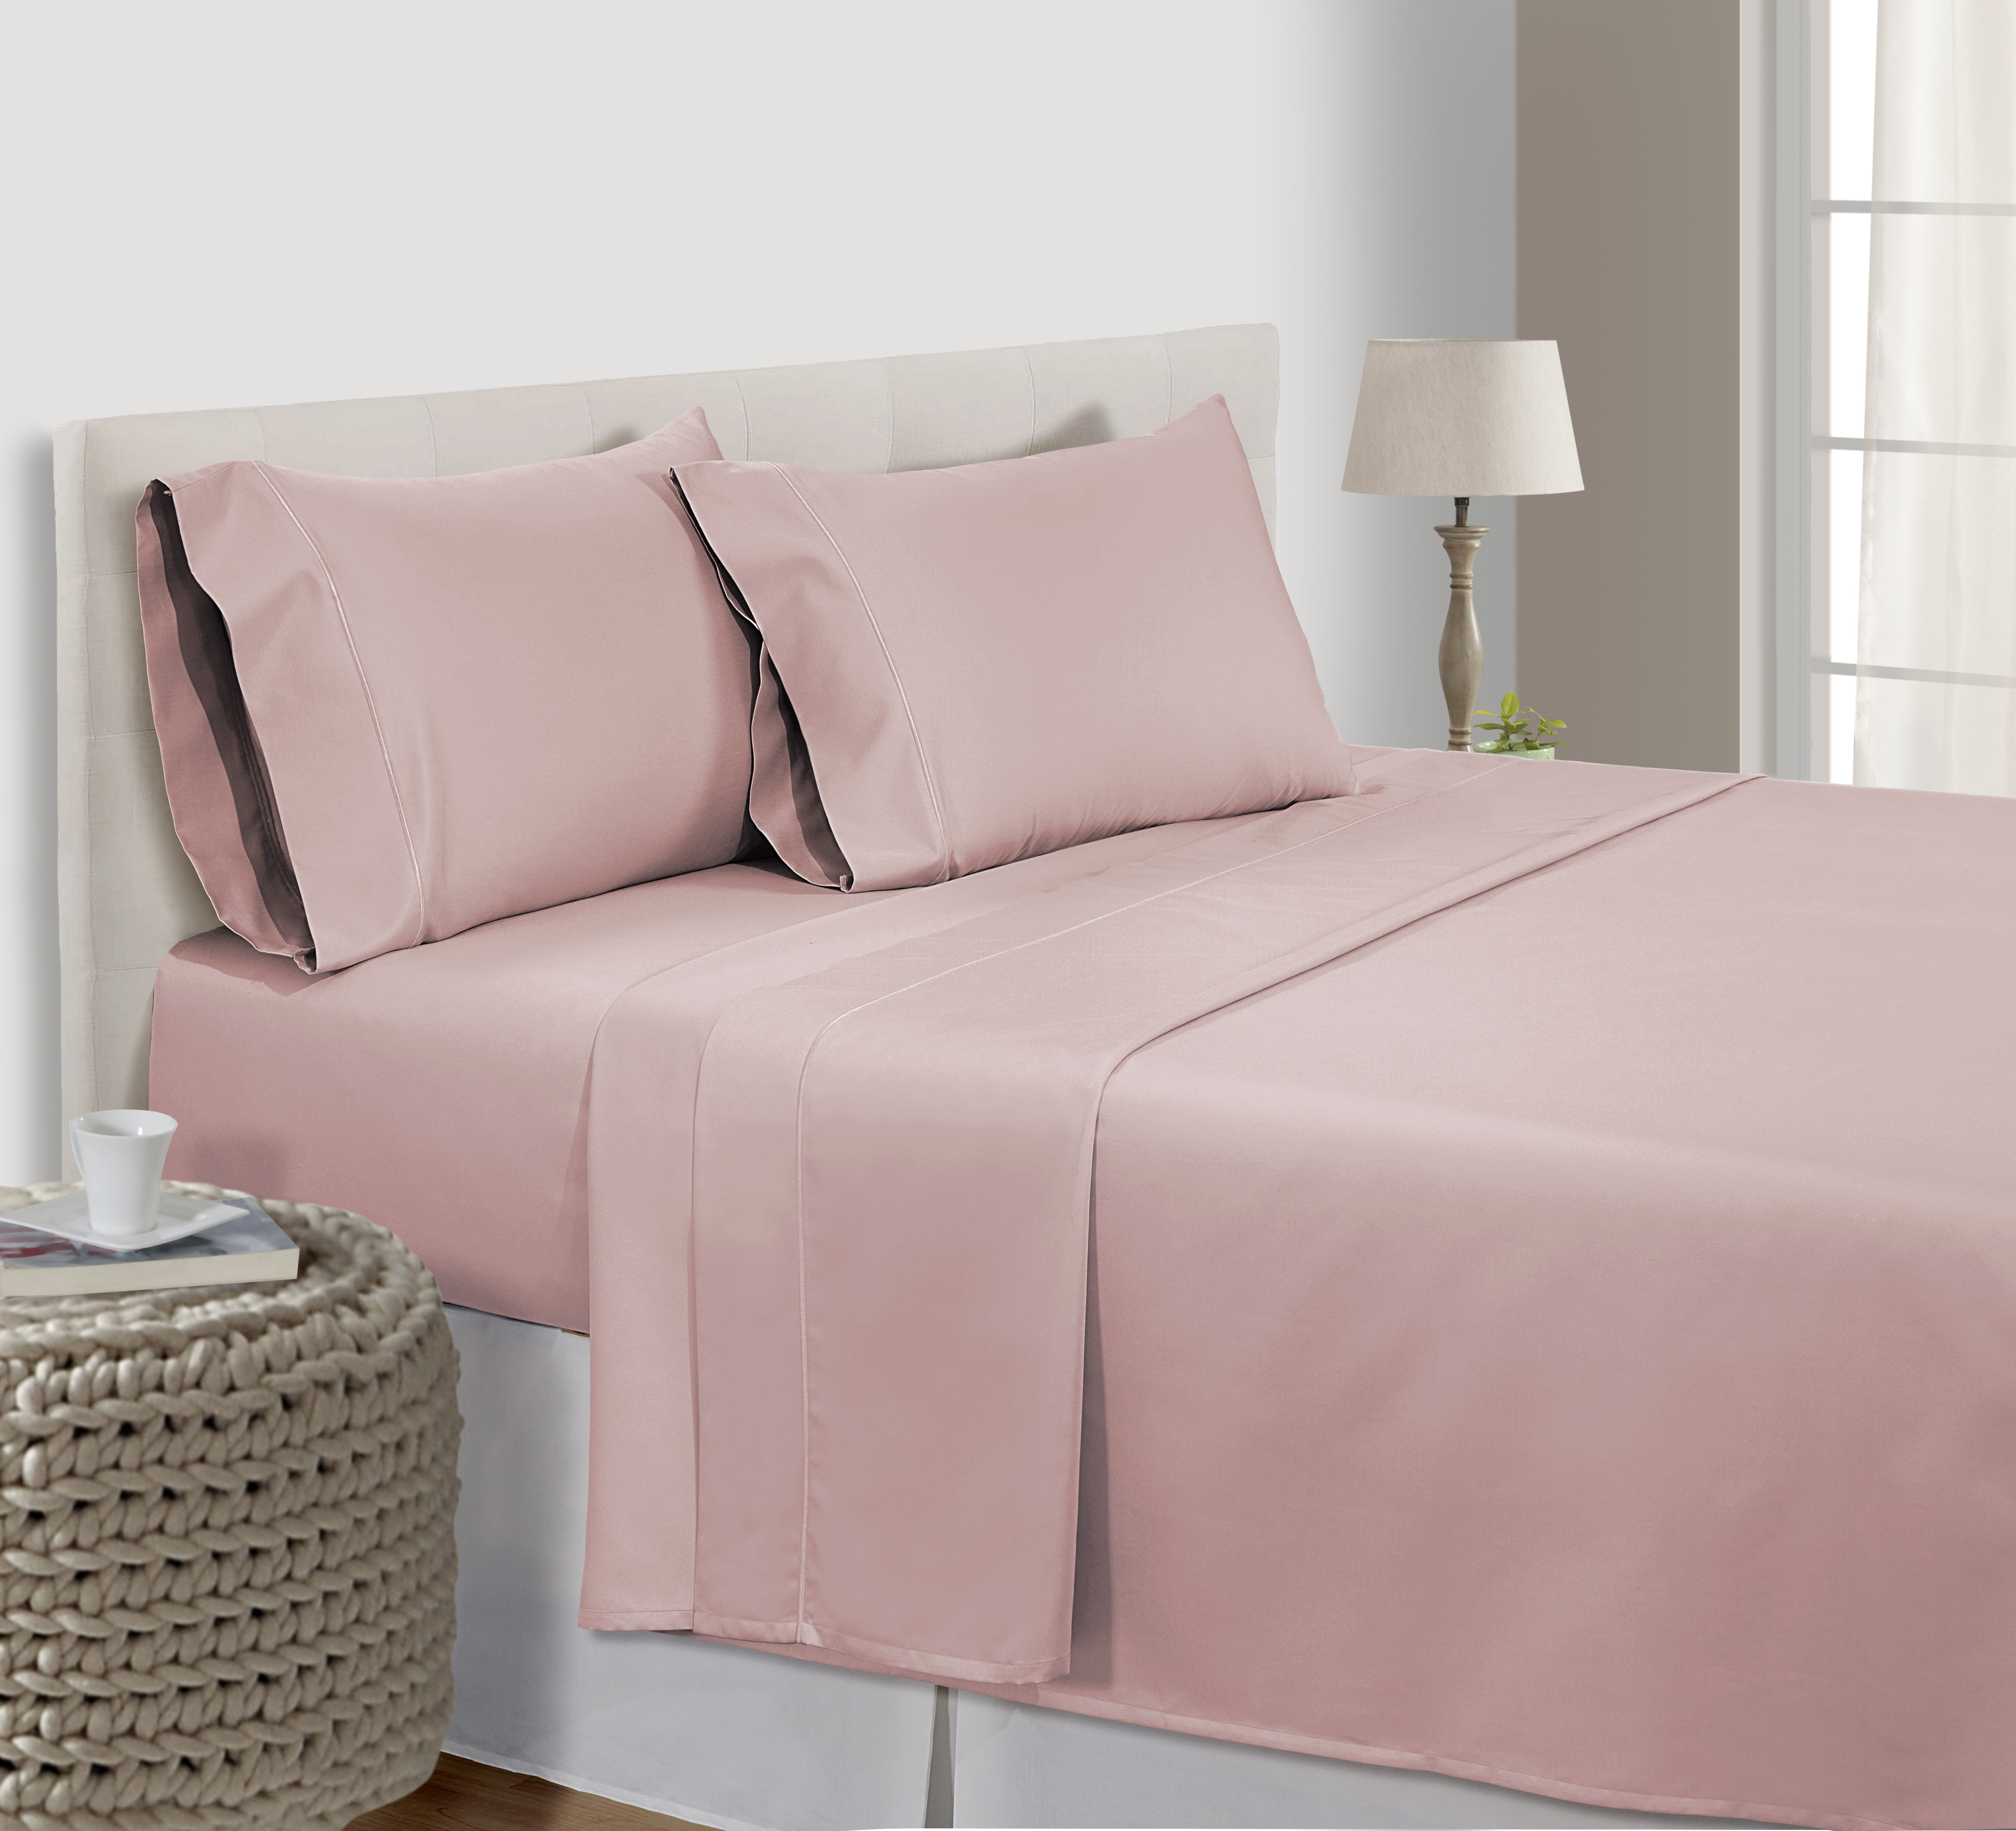 US All Size Bedding Items 100% Pima Cotton 1000 Thread Count Pink Solid 